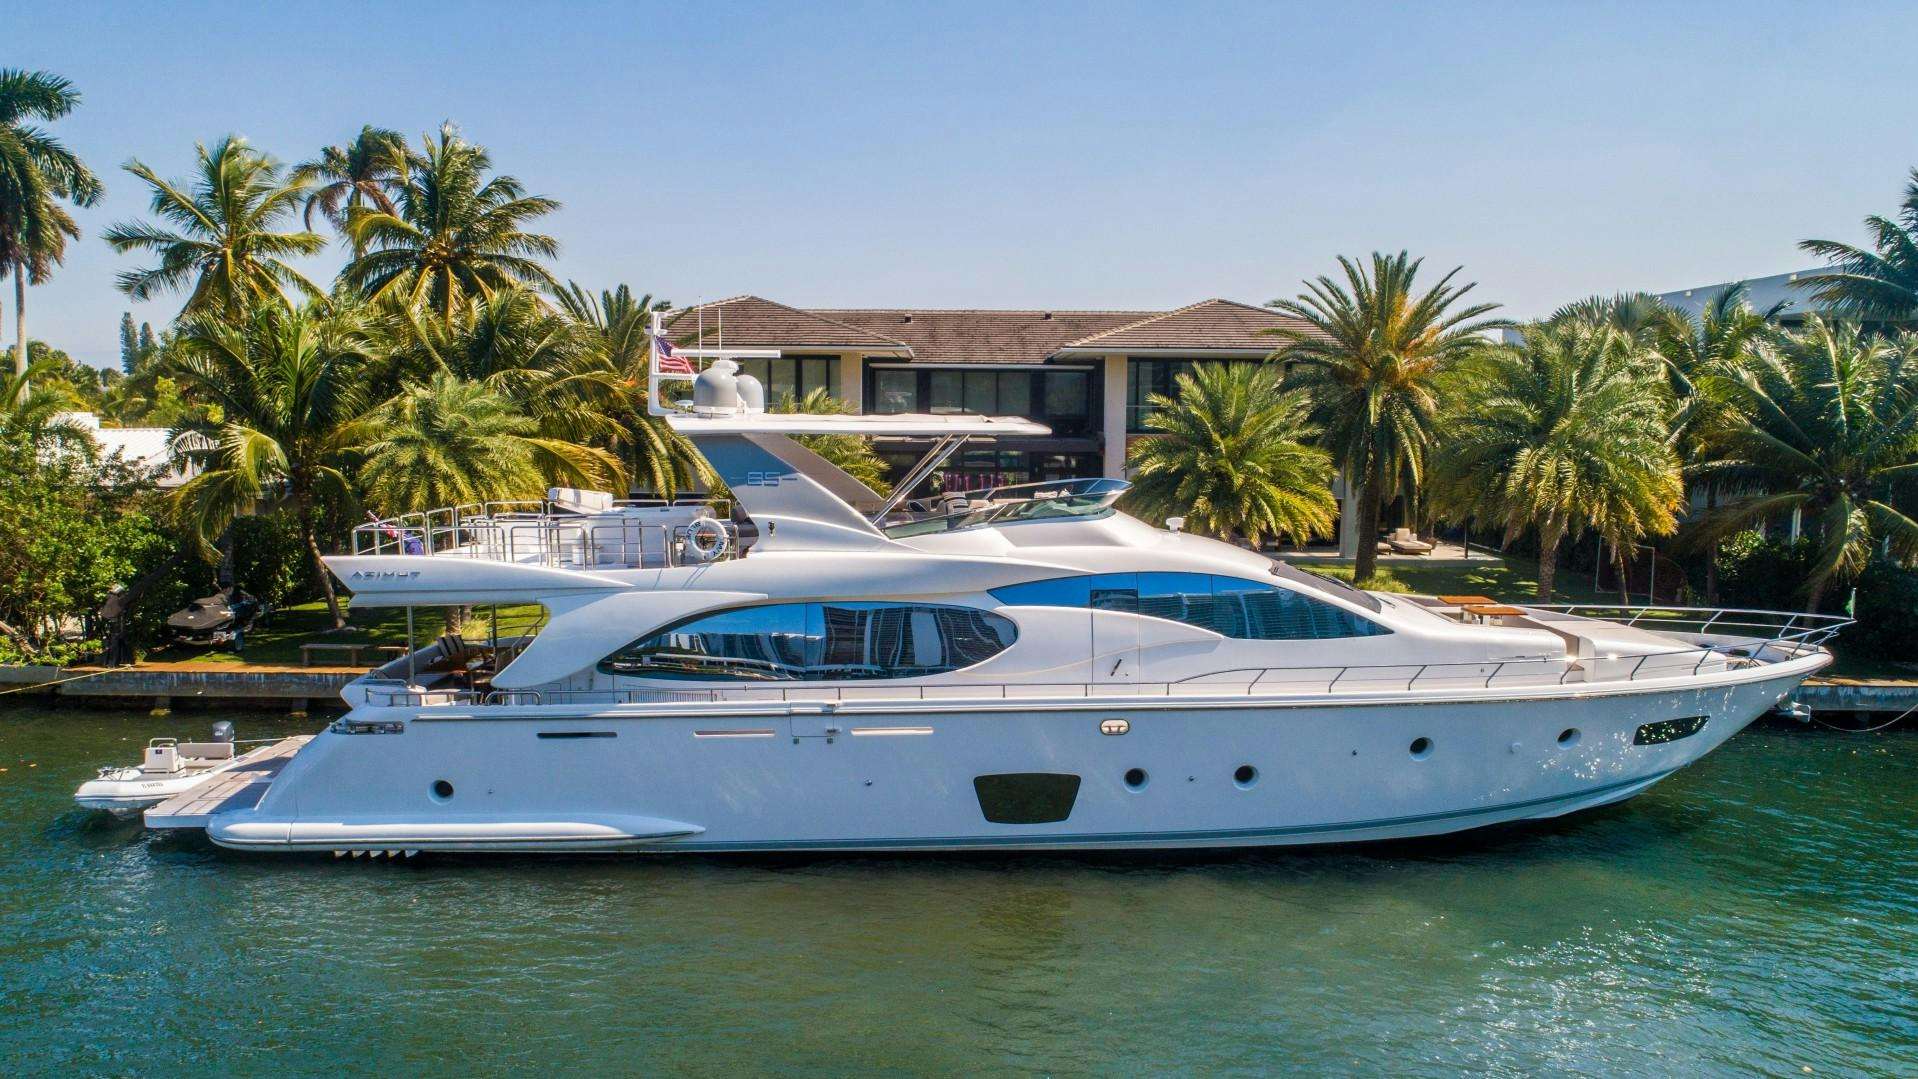 Watch Video for Blue Yacht for Sale